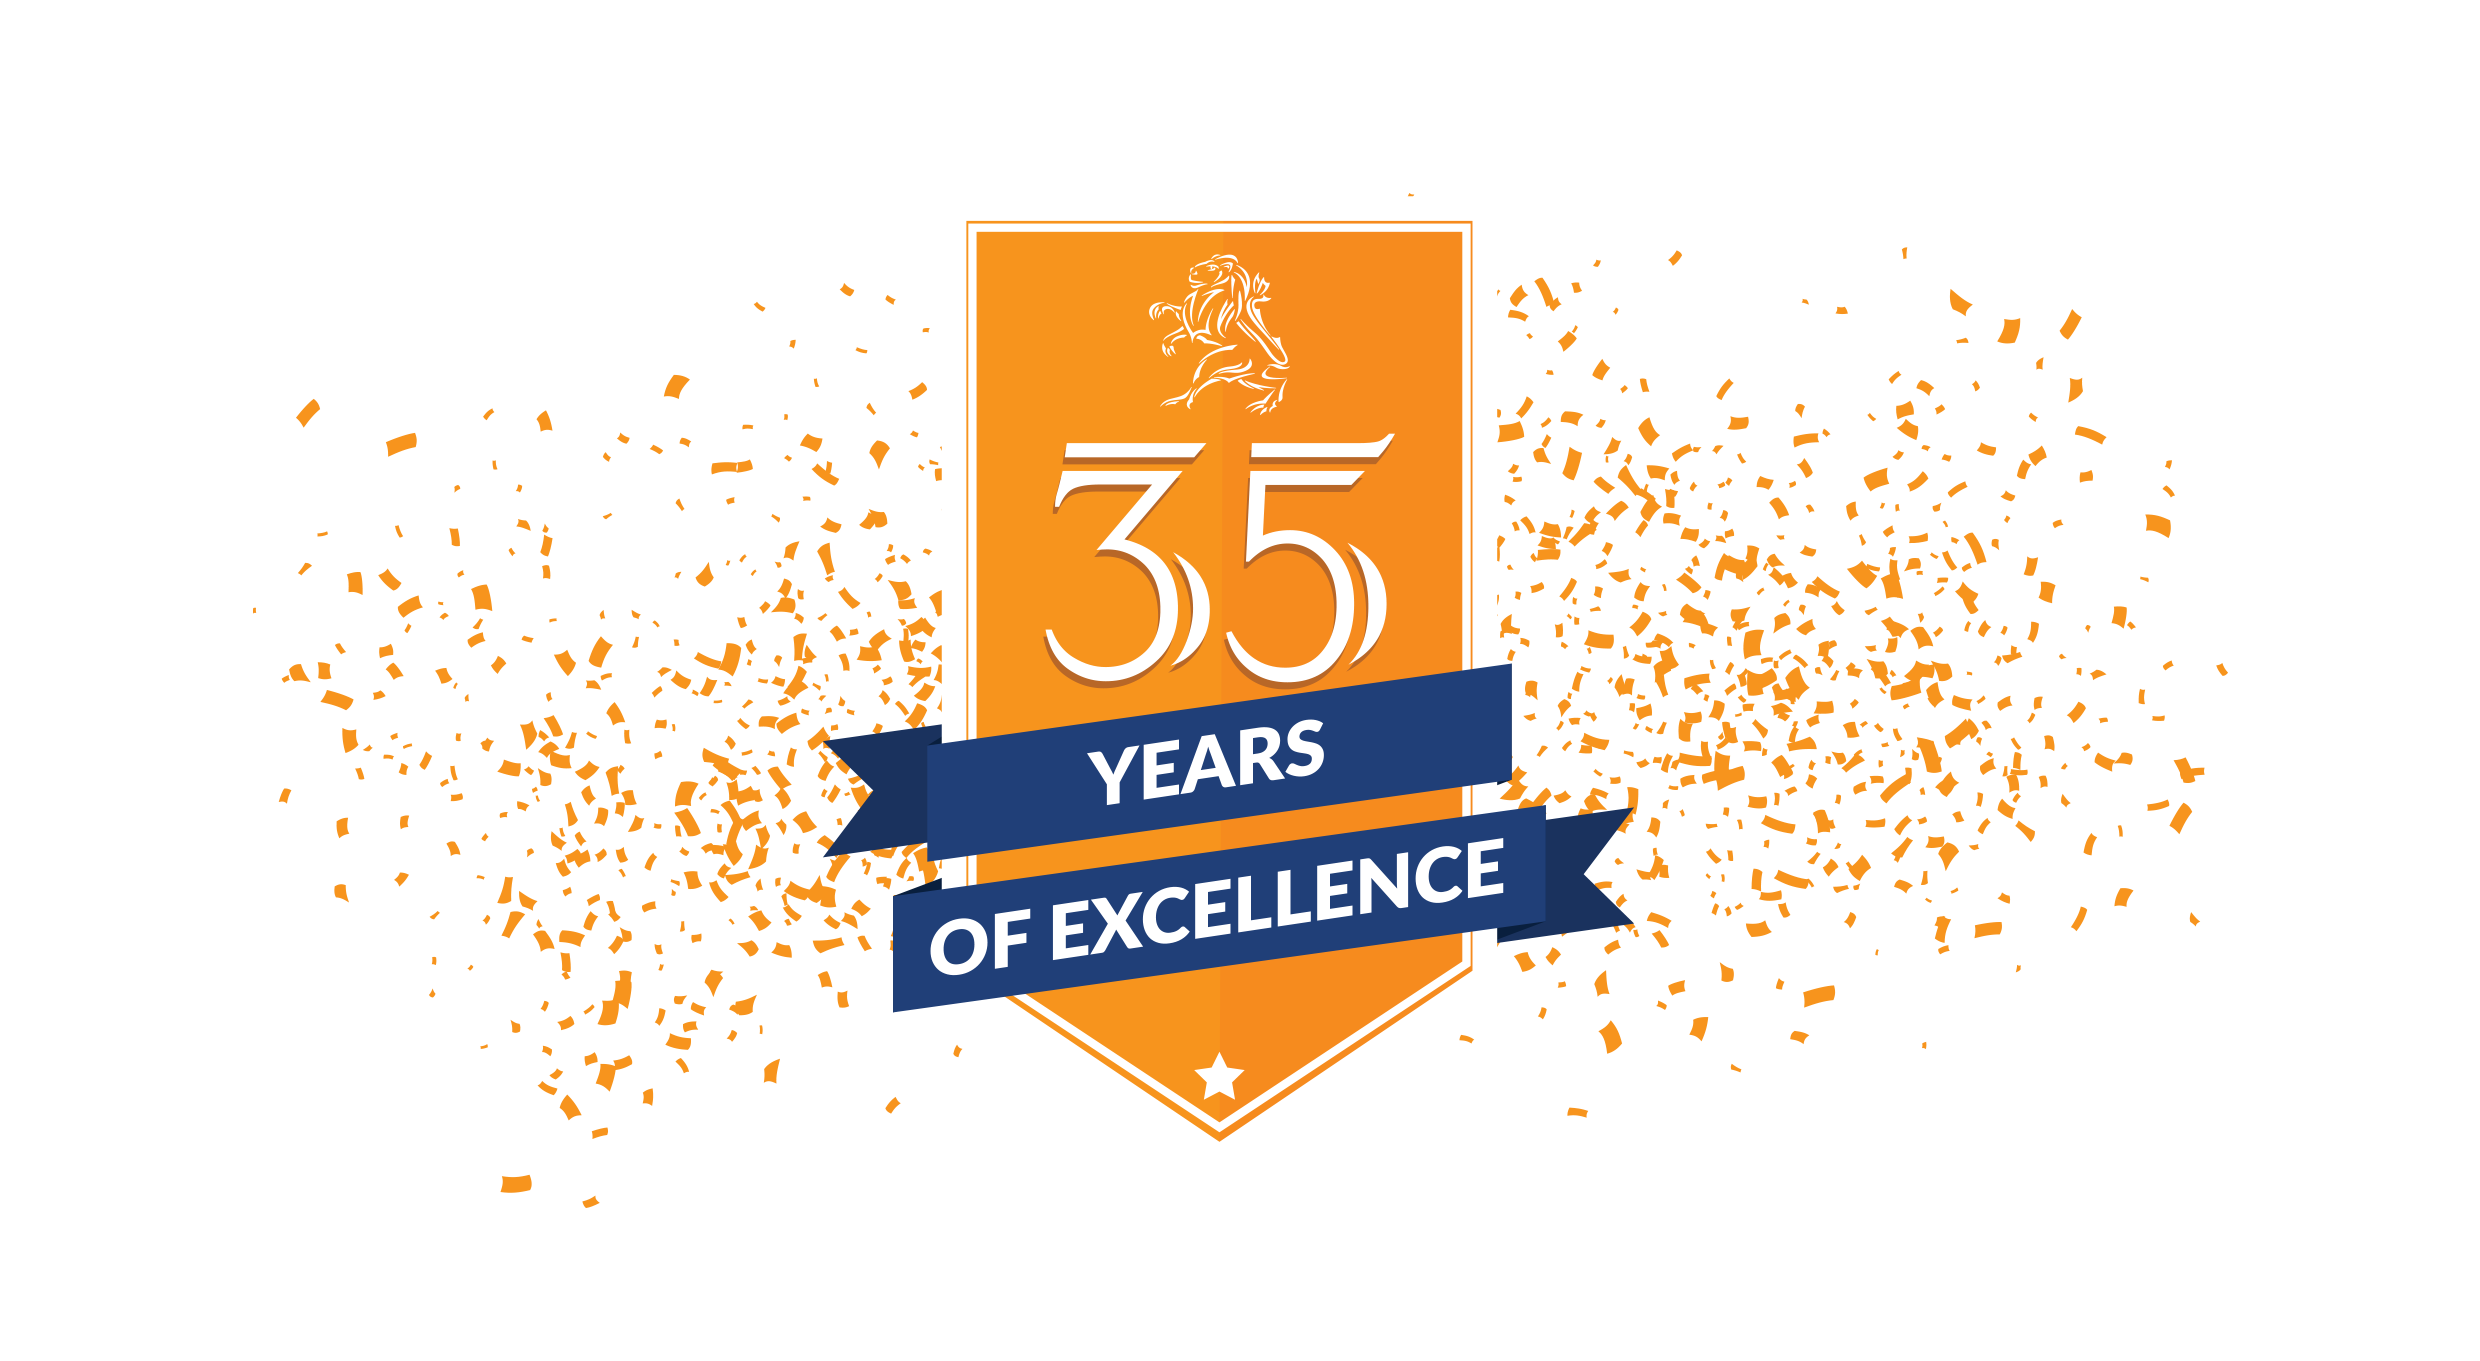 The BSN Language Centre celebrates 35 years of Excellence